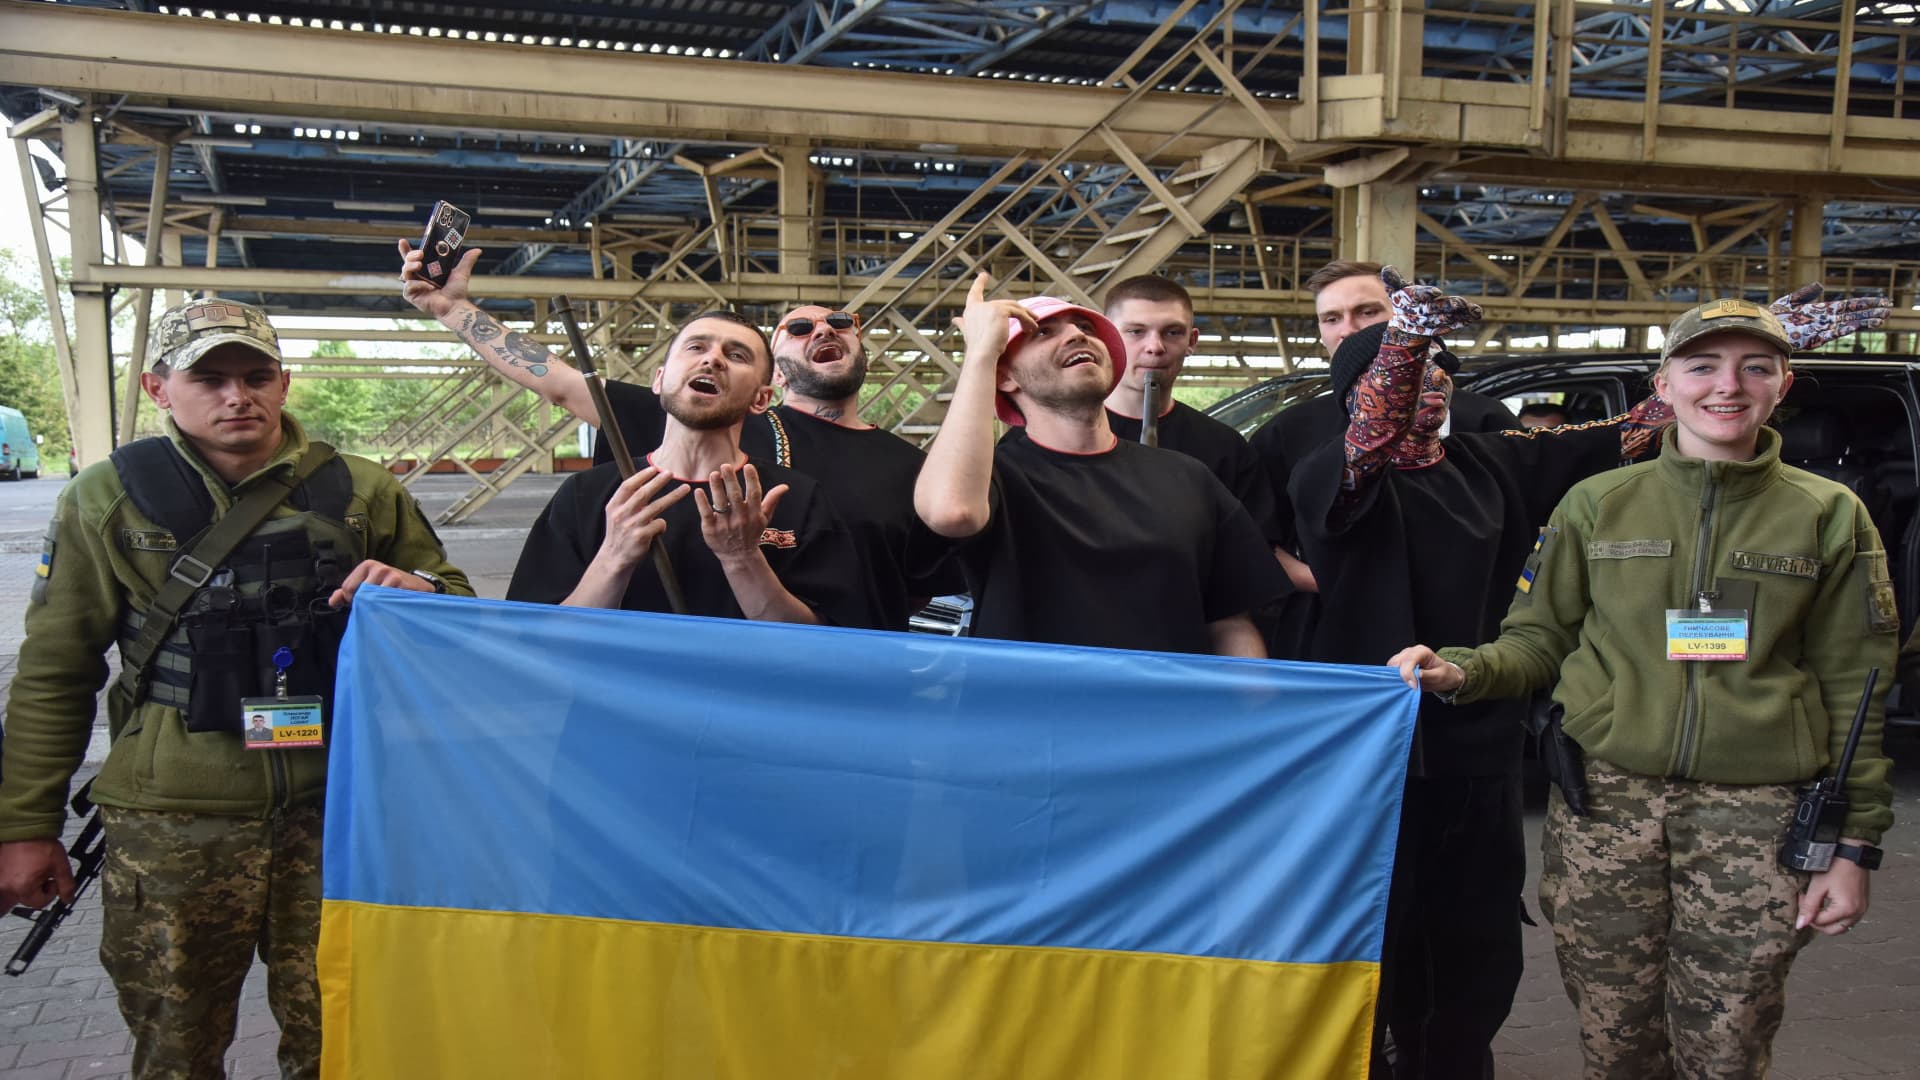 Kalush Orchestra, the winners of the 2022 Eurovision Song Contest, perform for the members of Ukraine's State Border Guard Service as they arrive at the Ukraine-Poland border crossing point near the village of Krakovets, in Lviv region, Ukraine May 16, 2022. 